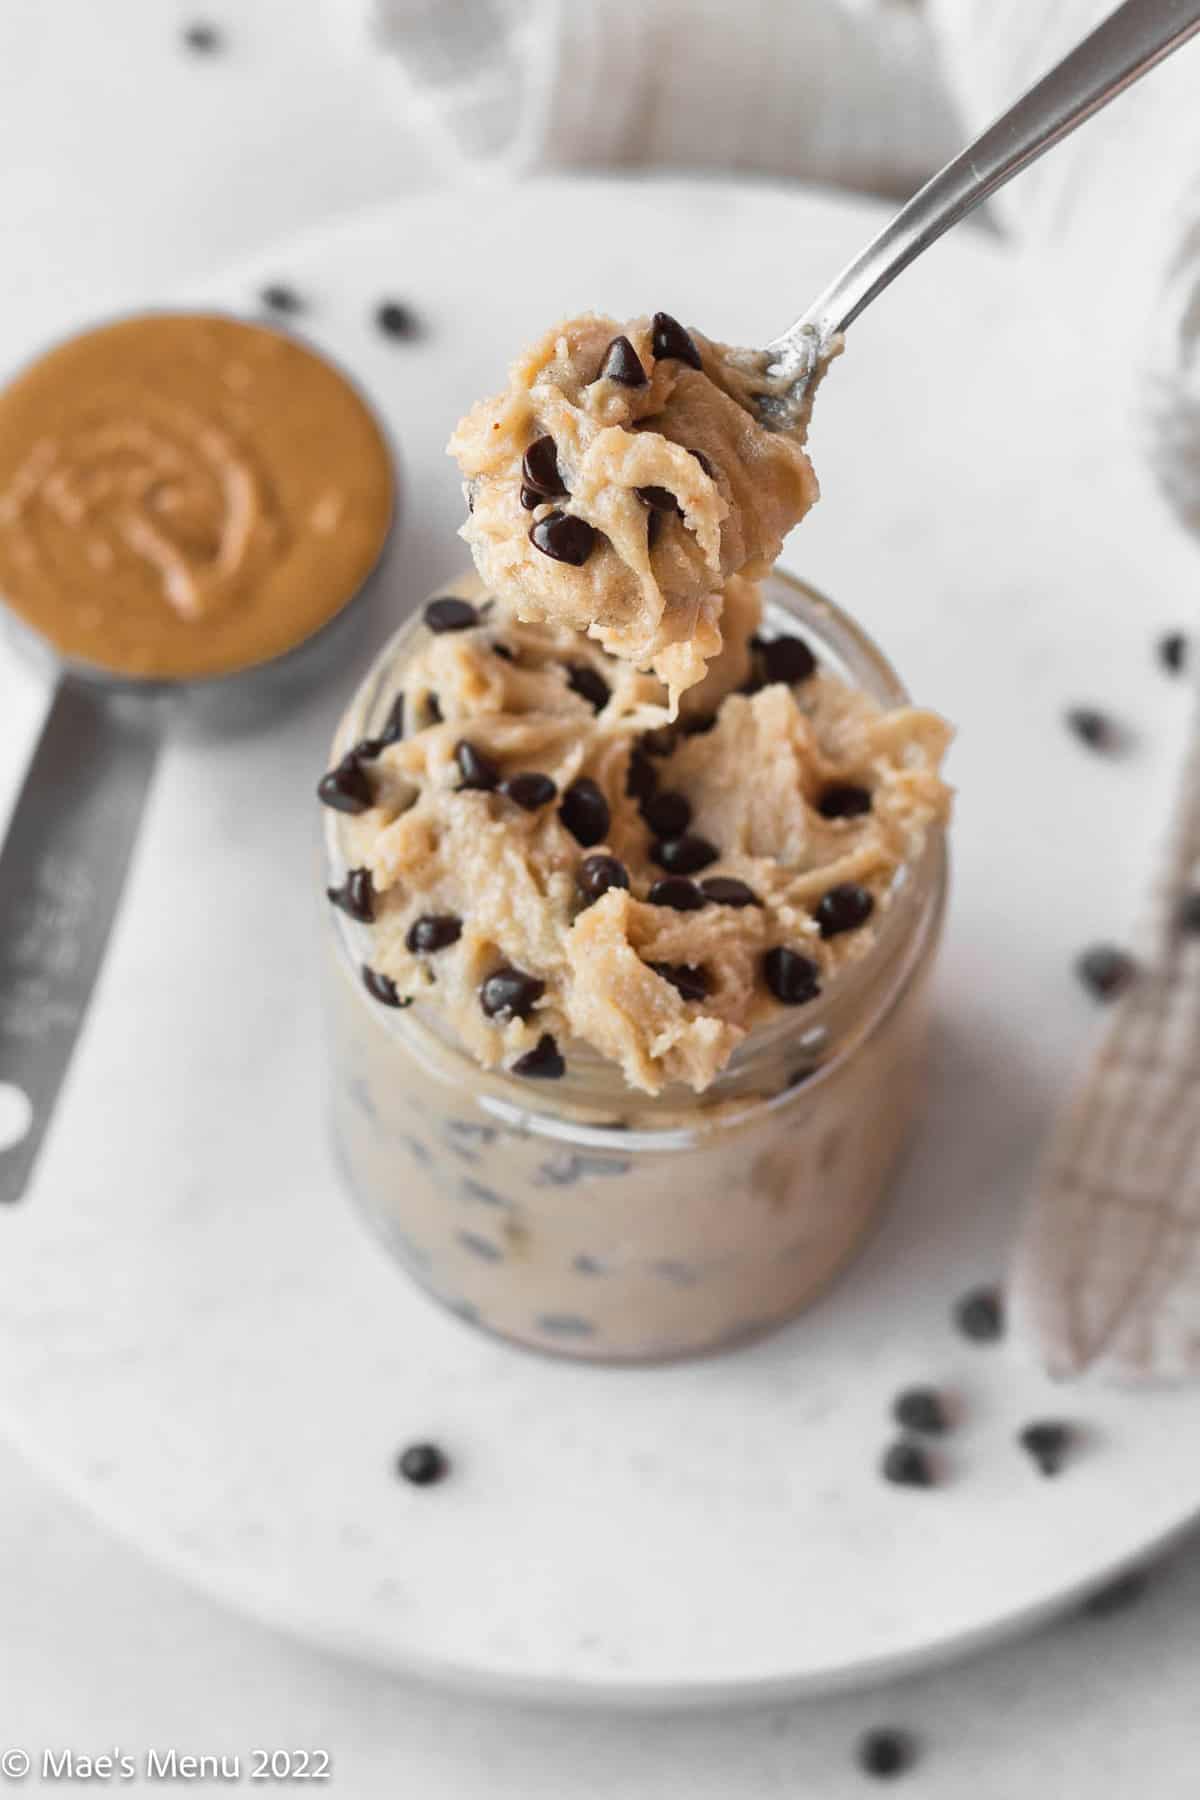 A spoonful of the edible cookie dough and a small cup of the cookie dough.